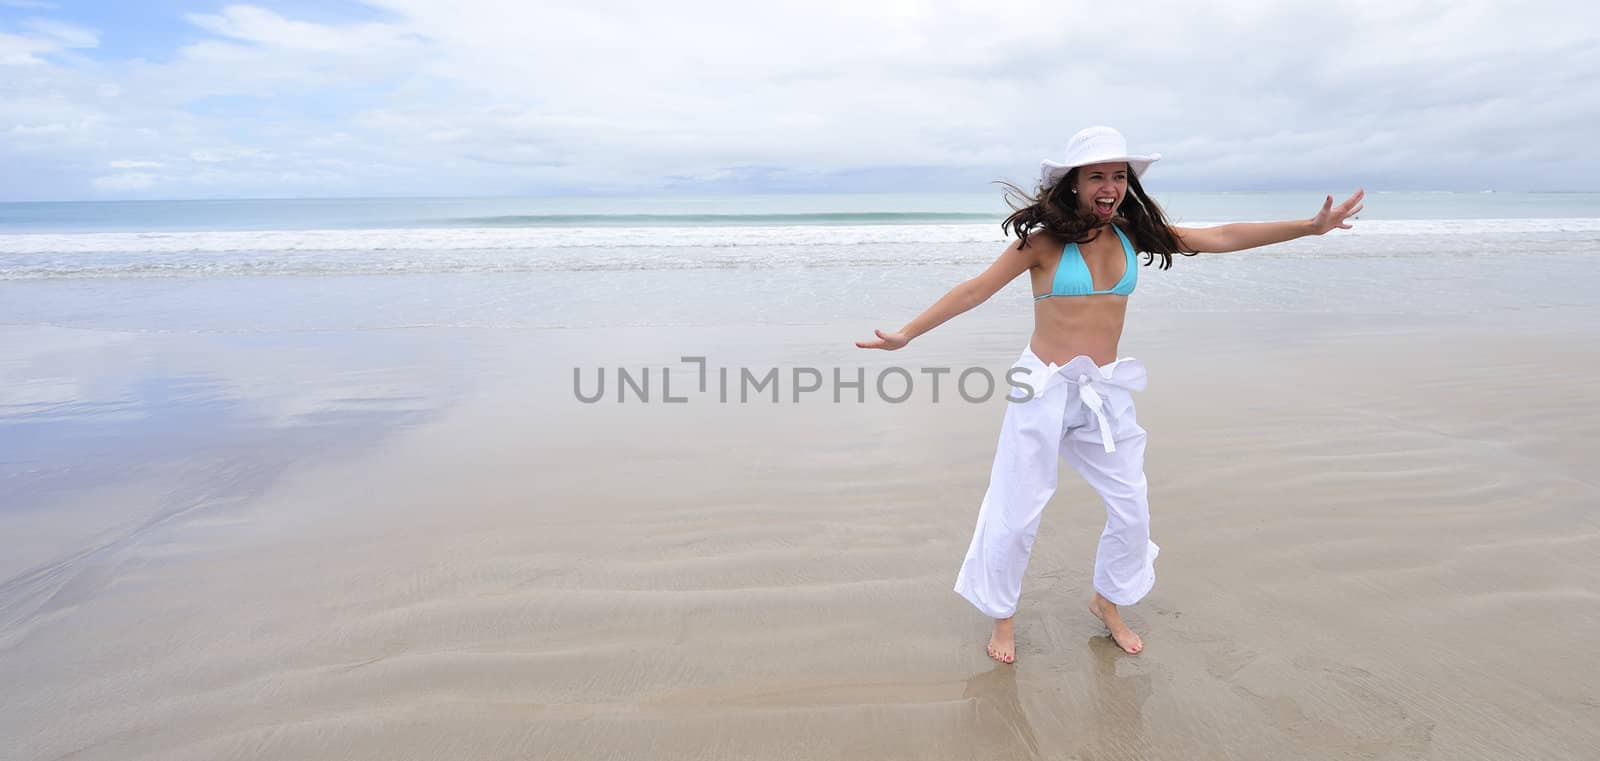 Woman enjoying her holiday in the beach in Brazil
